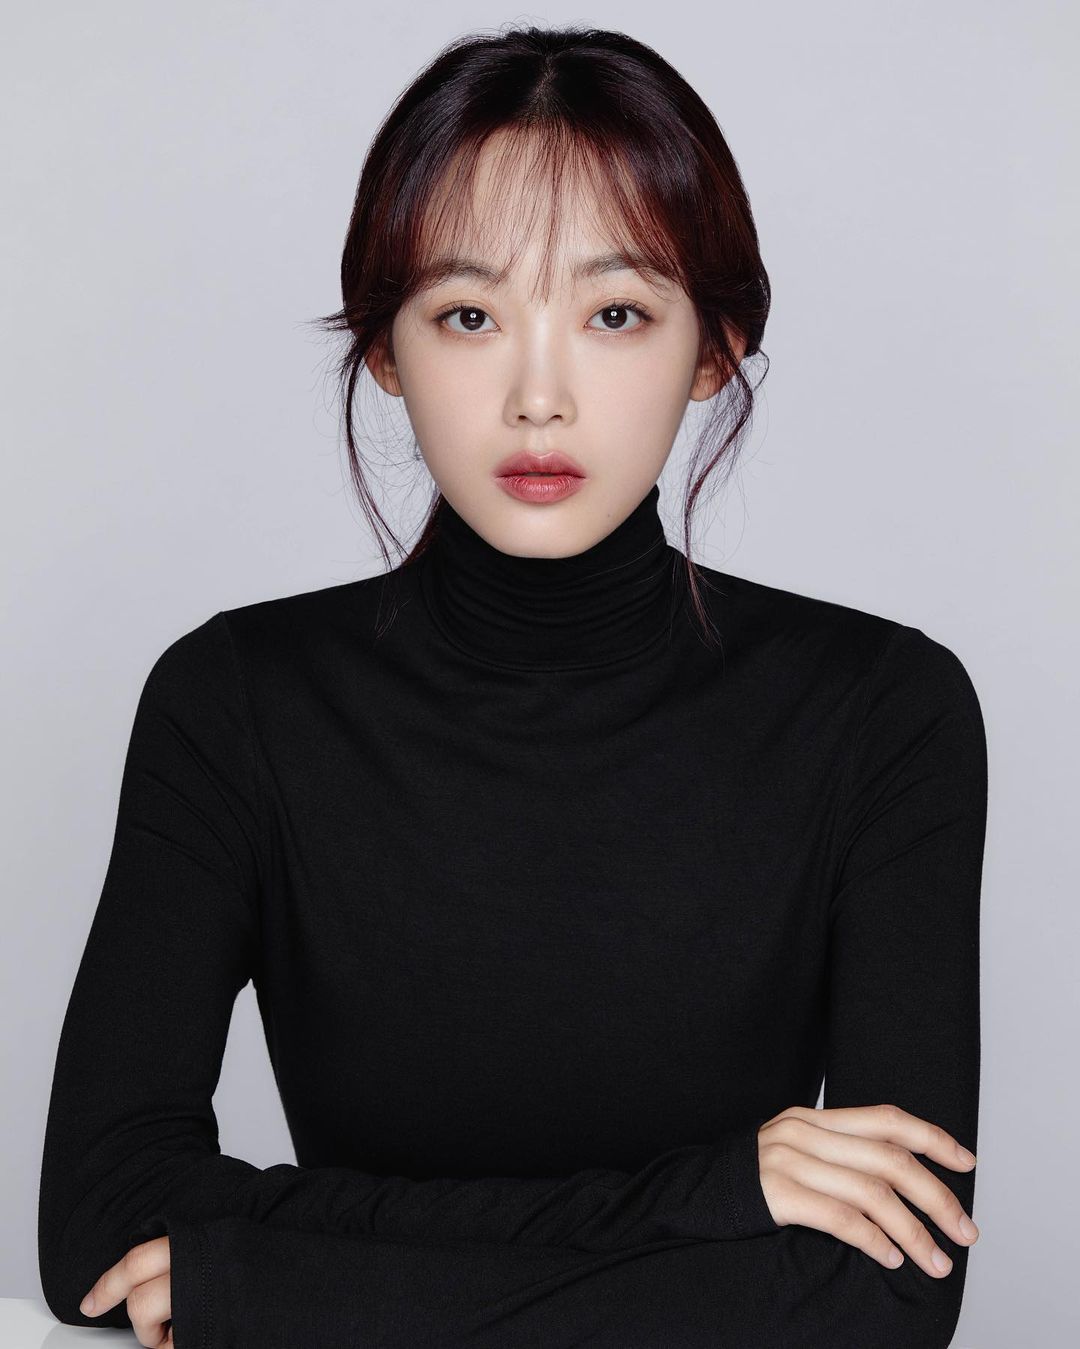 How did Lee Yoo-mi spend her early days